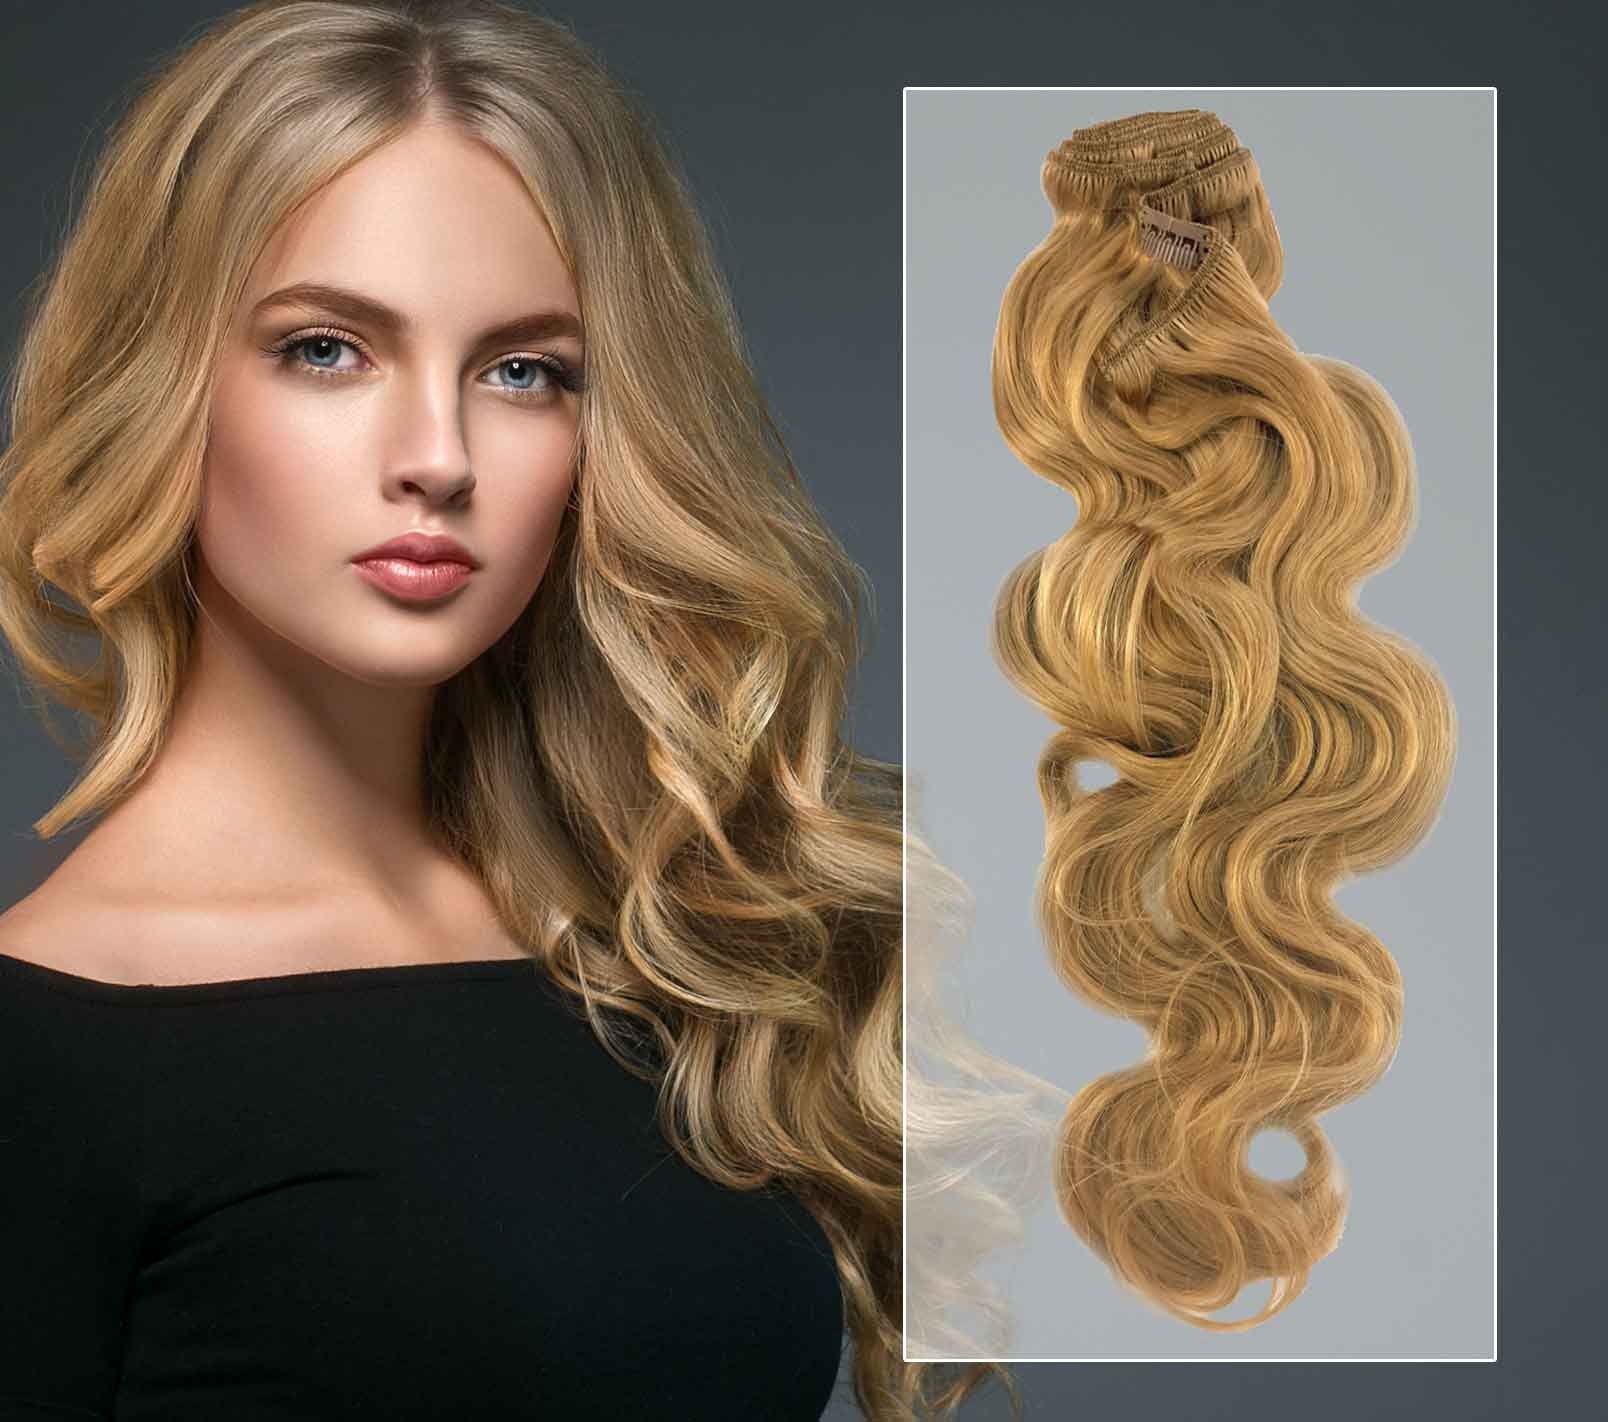 Curly Hair Extensions with Clips - Expert Guide - Extension Hair